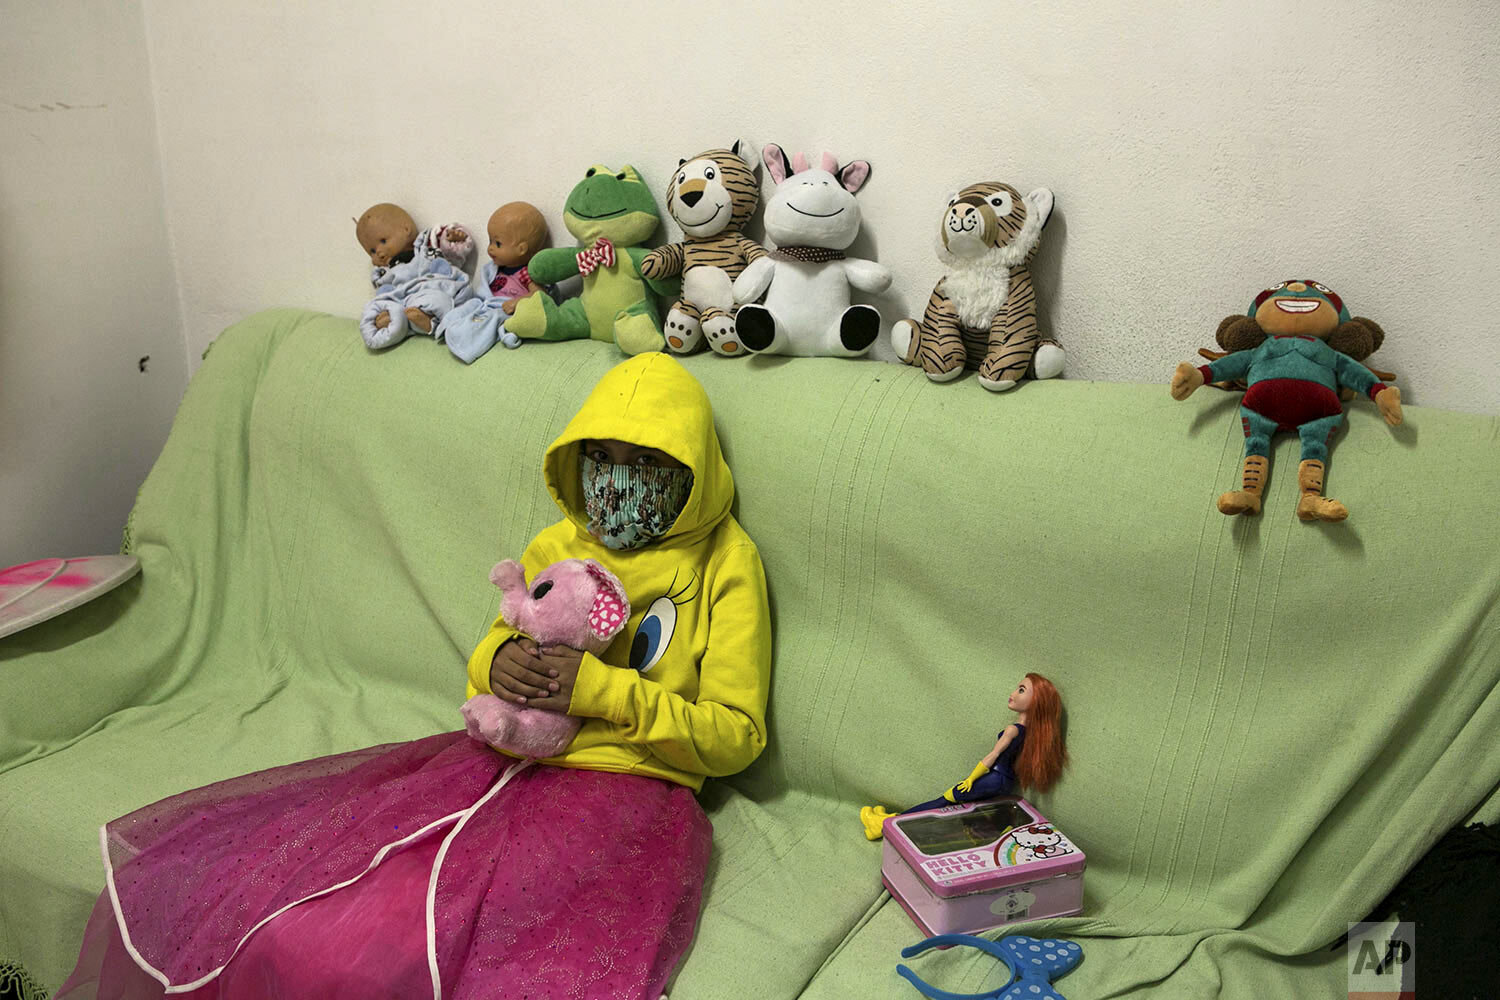  A 10-year-old victim of sexual abuse, who keeps her face covered to hide her identity, poses for a portrait with her stuffed animals inside the Mexican Human Rights Commission (CNDH) headquarters where she has been living with her grandmother, mothe